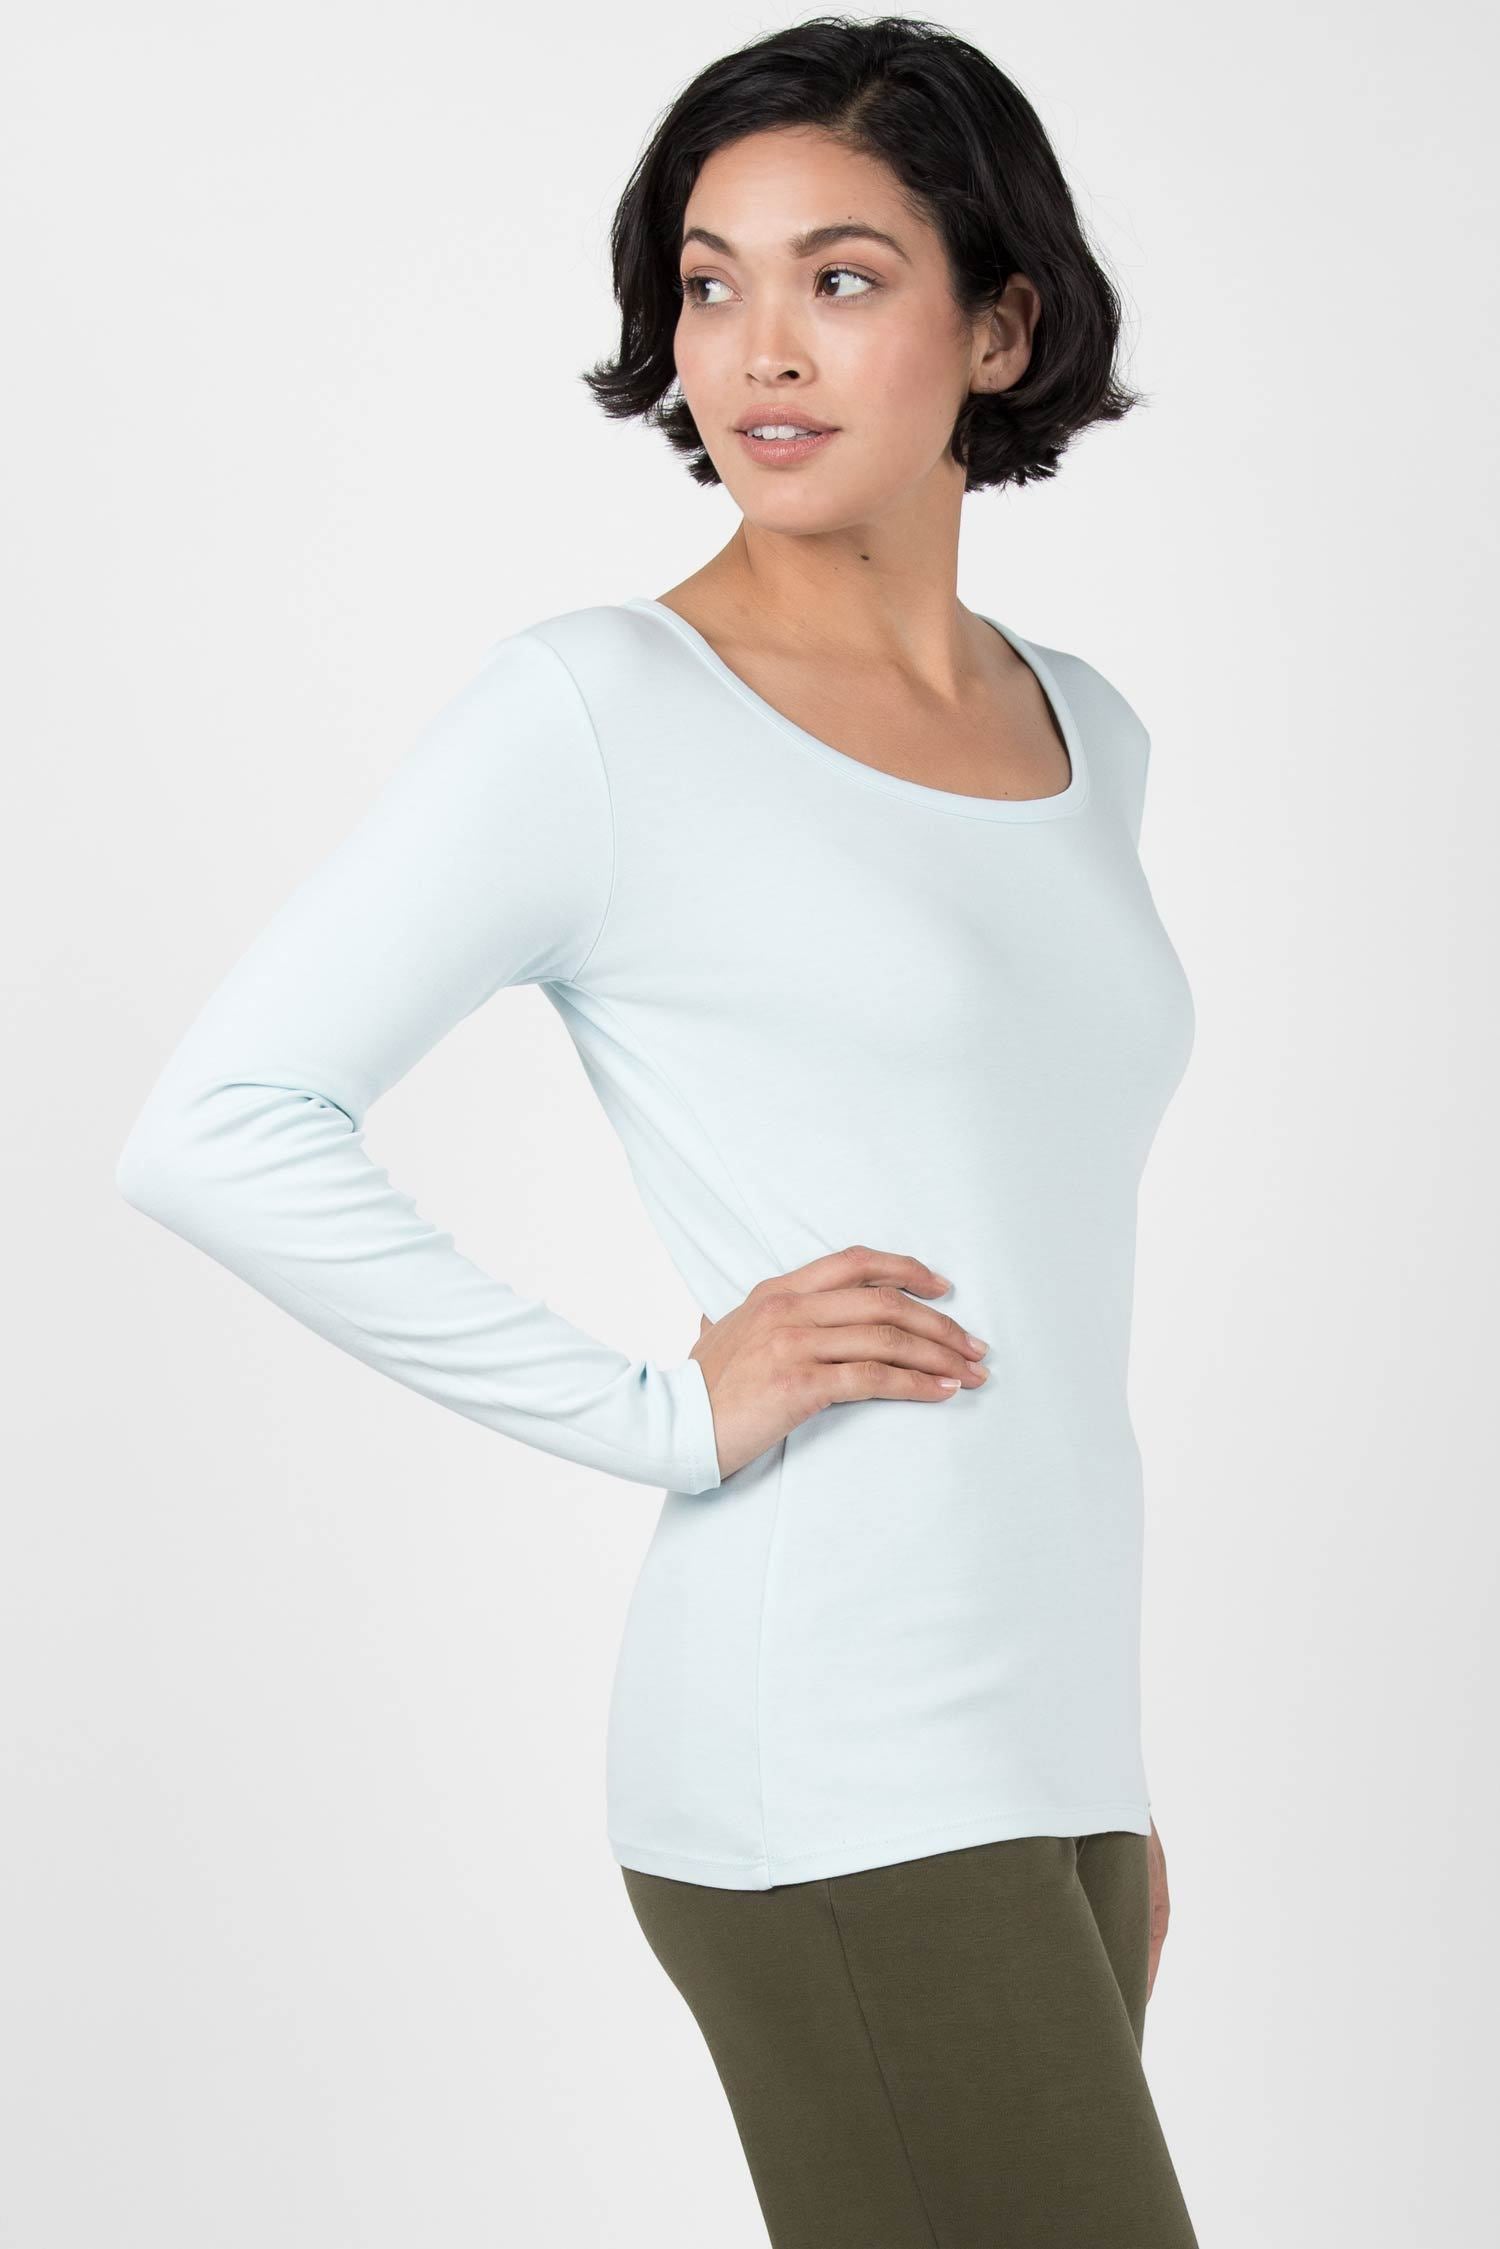 Women's Clearance Avenue Slim Long Sleeve Top made with Organic Cotton